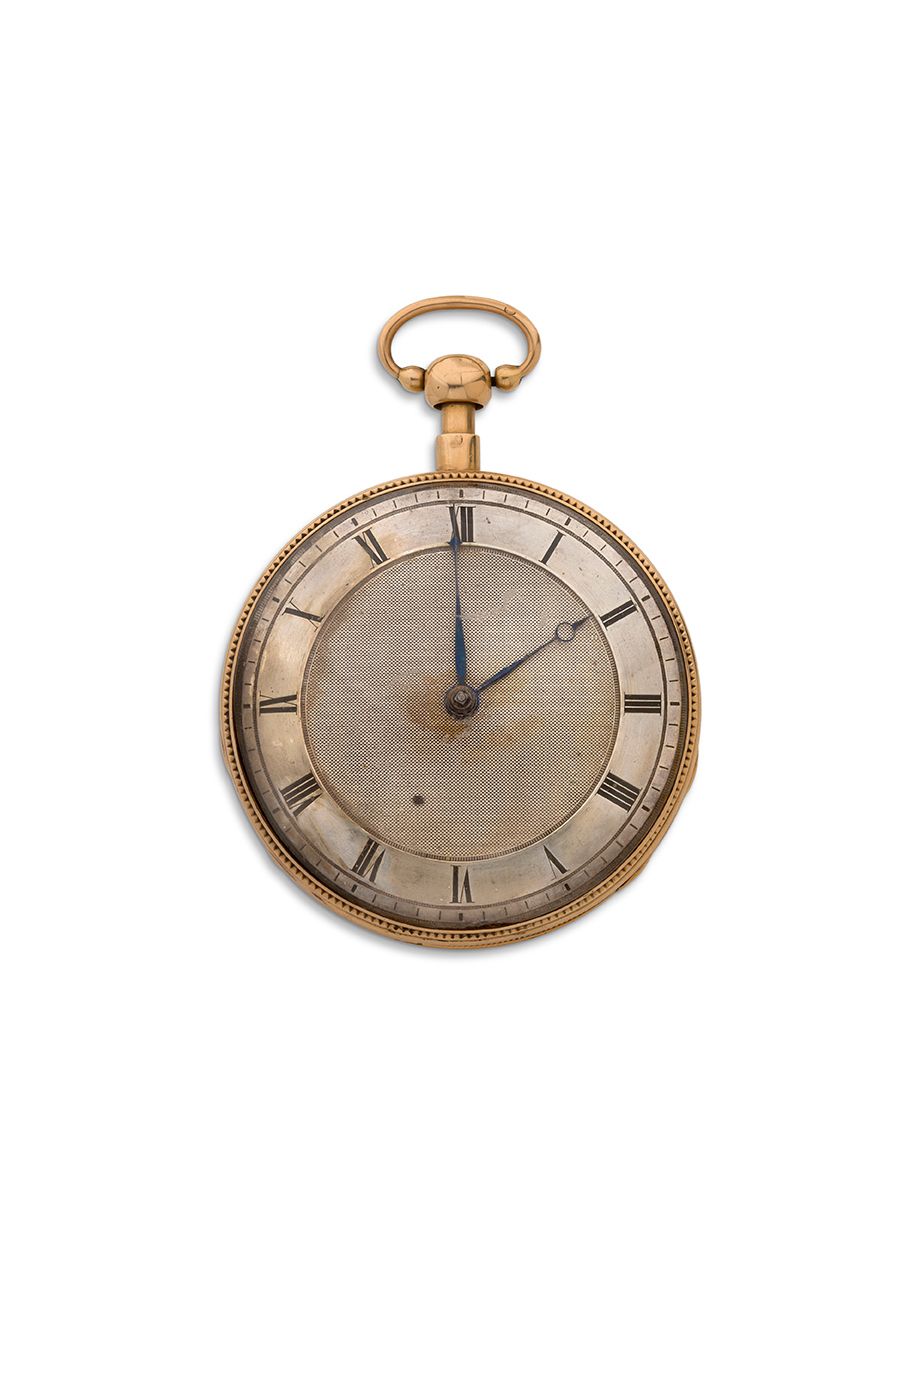 ANONYME 
Gold watch with quarter repeater



Case on hinge, fluted caseband, gil&hellip;